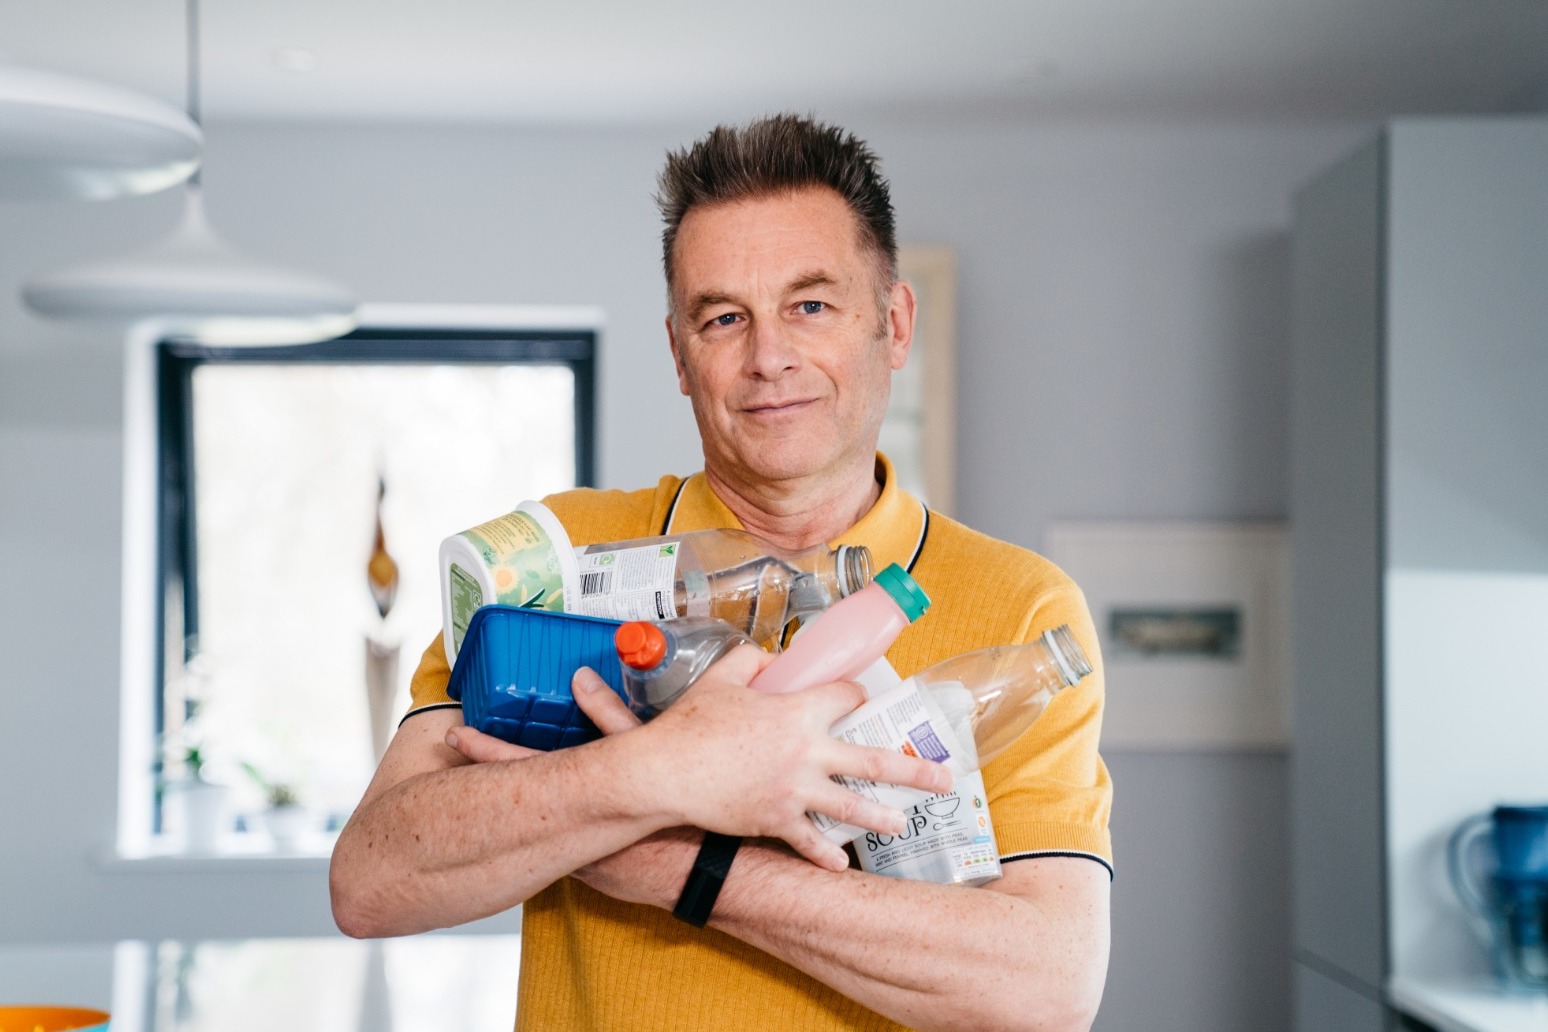 TV star Chris Packham joins protest against ‘attack on environmental laws’ 